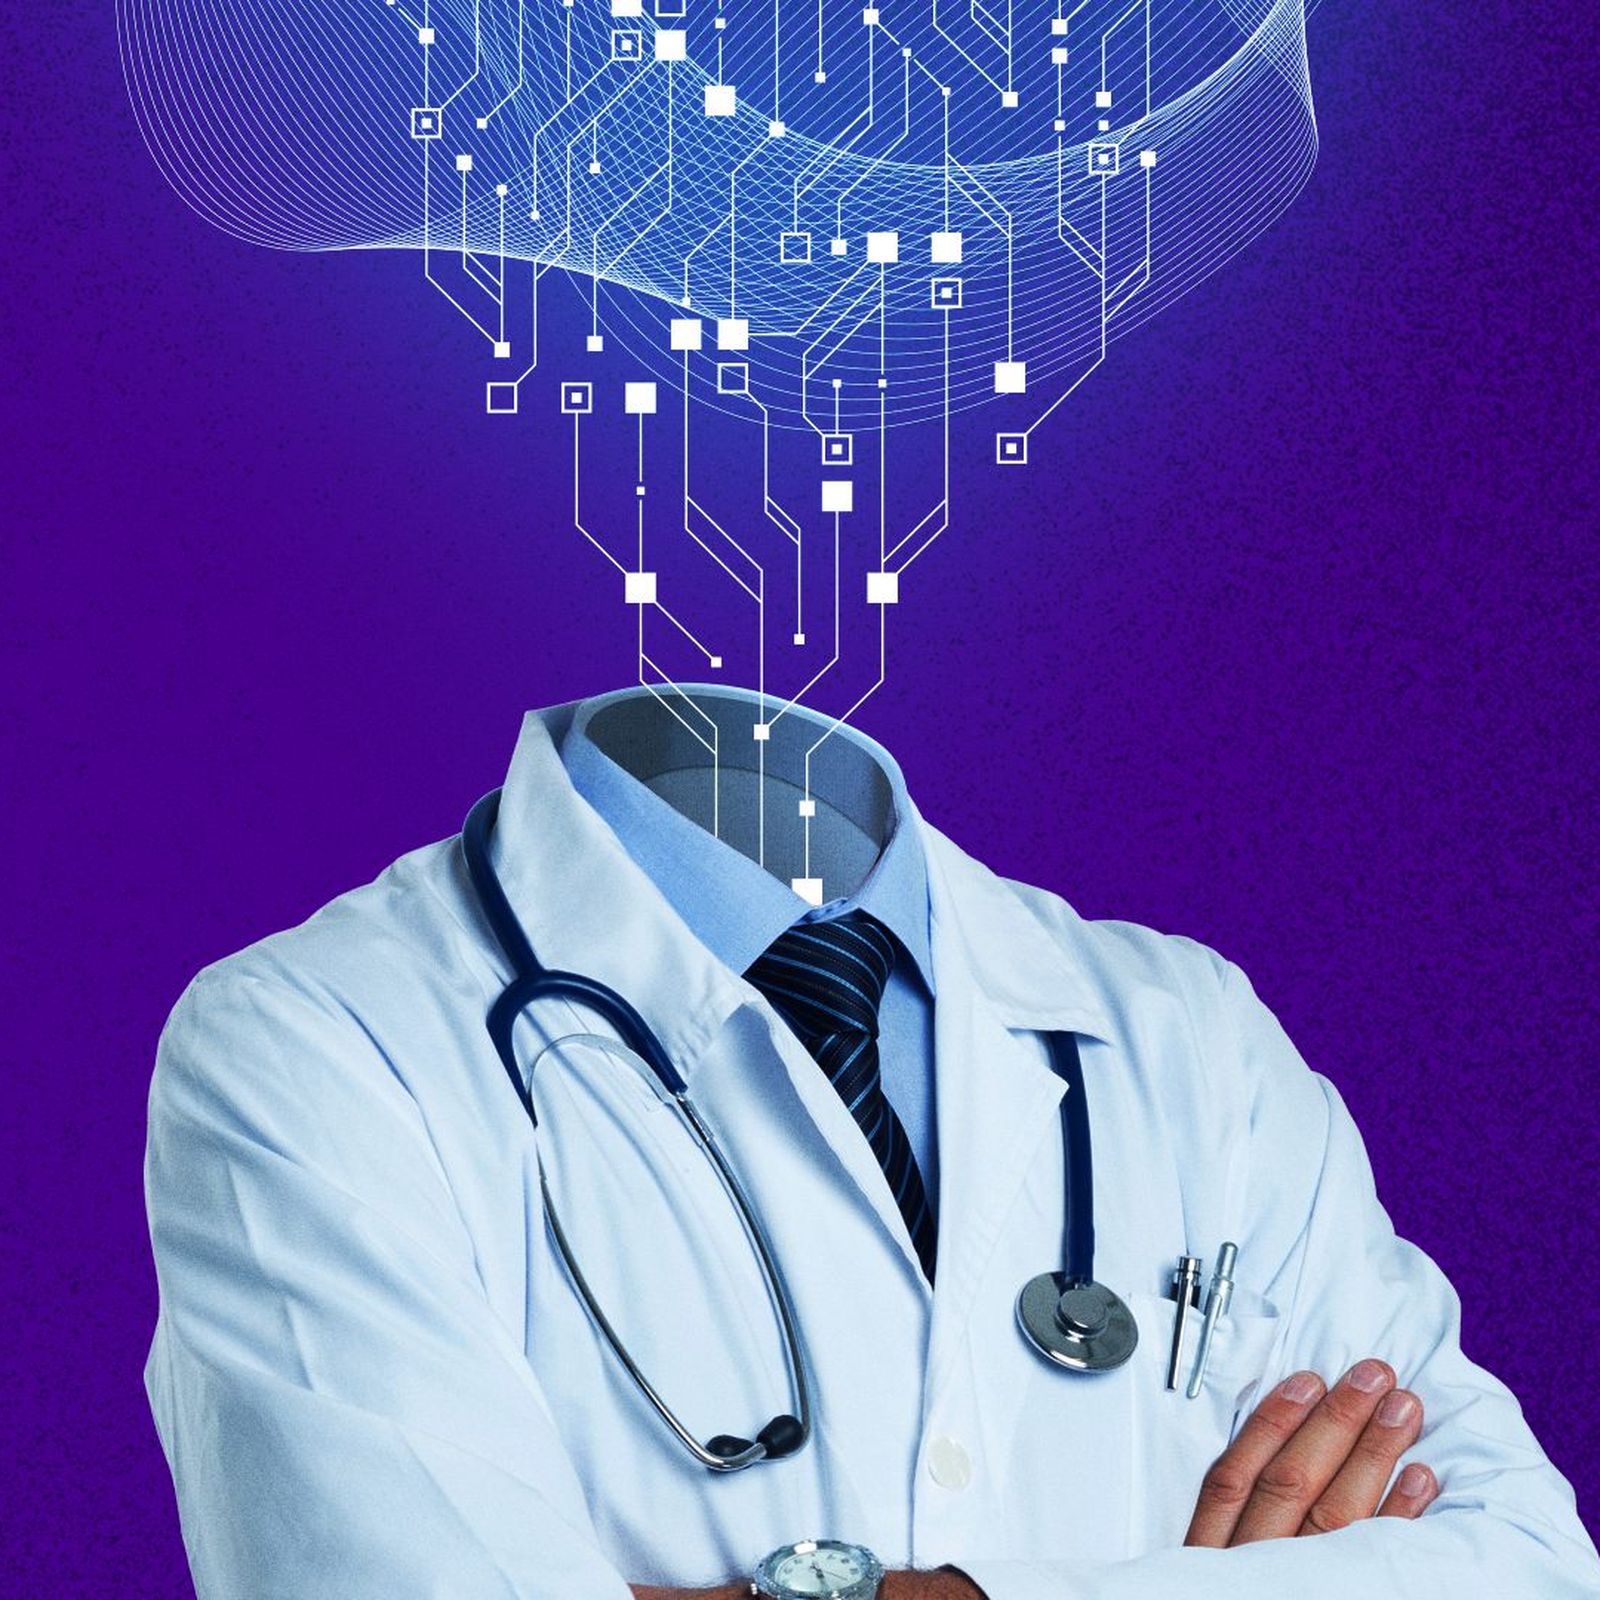 AI could someday make medical decisions instead of your doctor